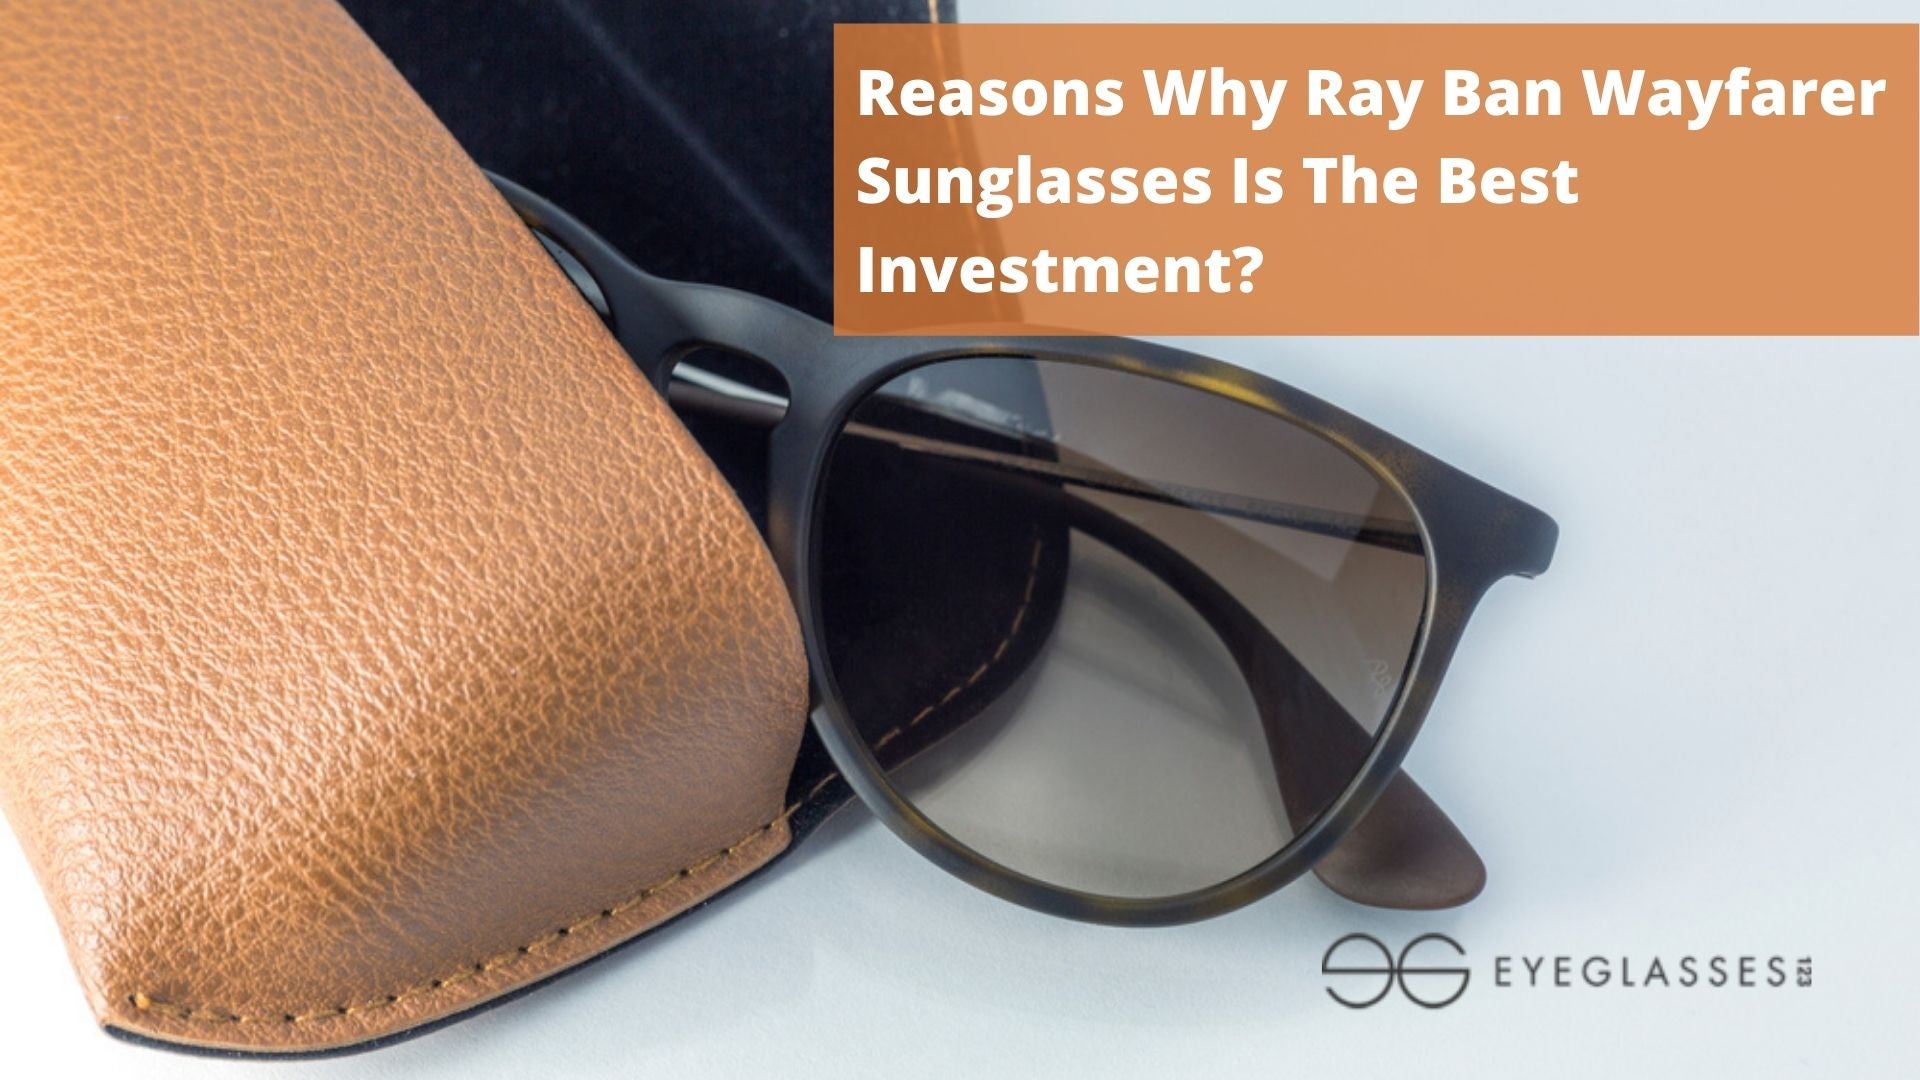 Reasons Why Ray Ban Wayfarer Sunglasses Is The Best Investment